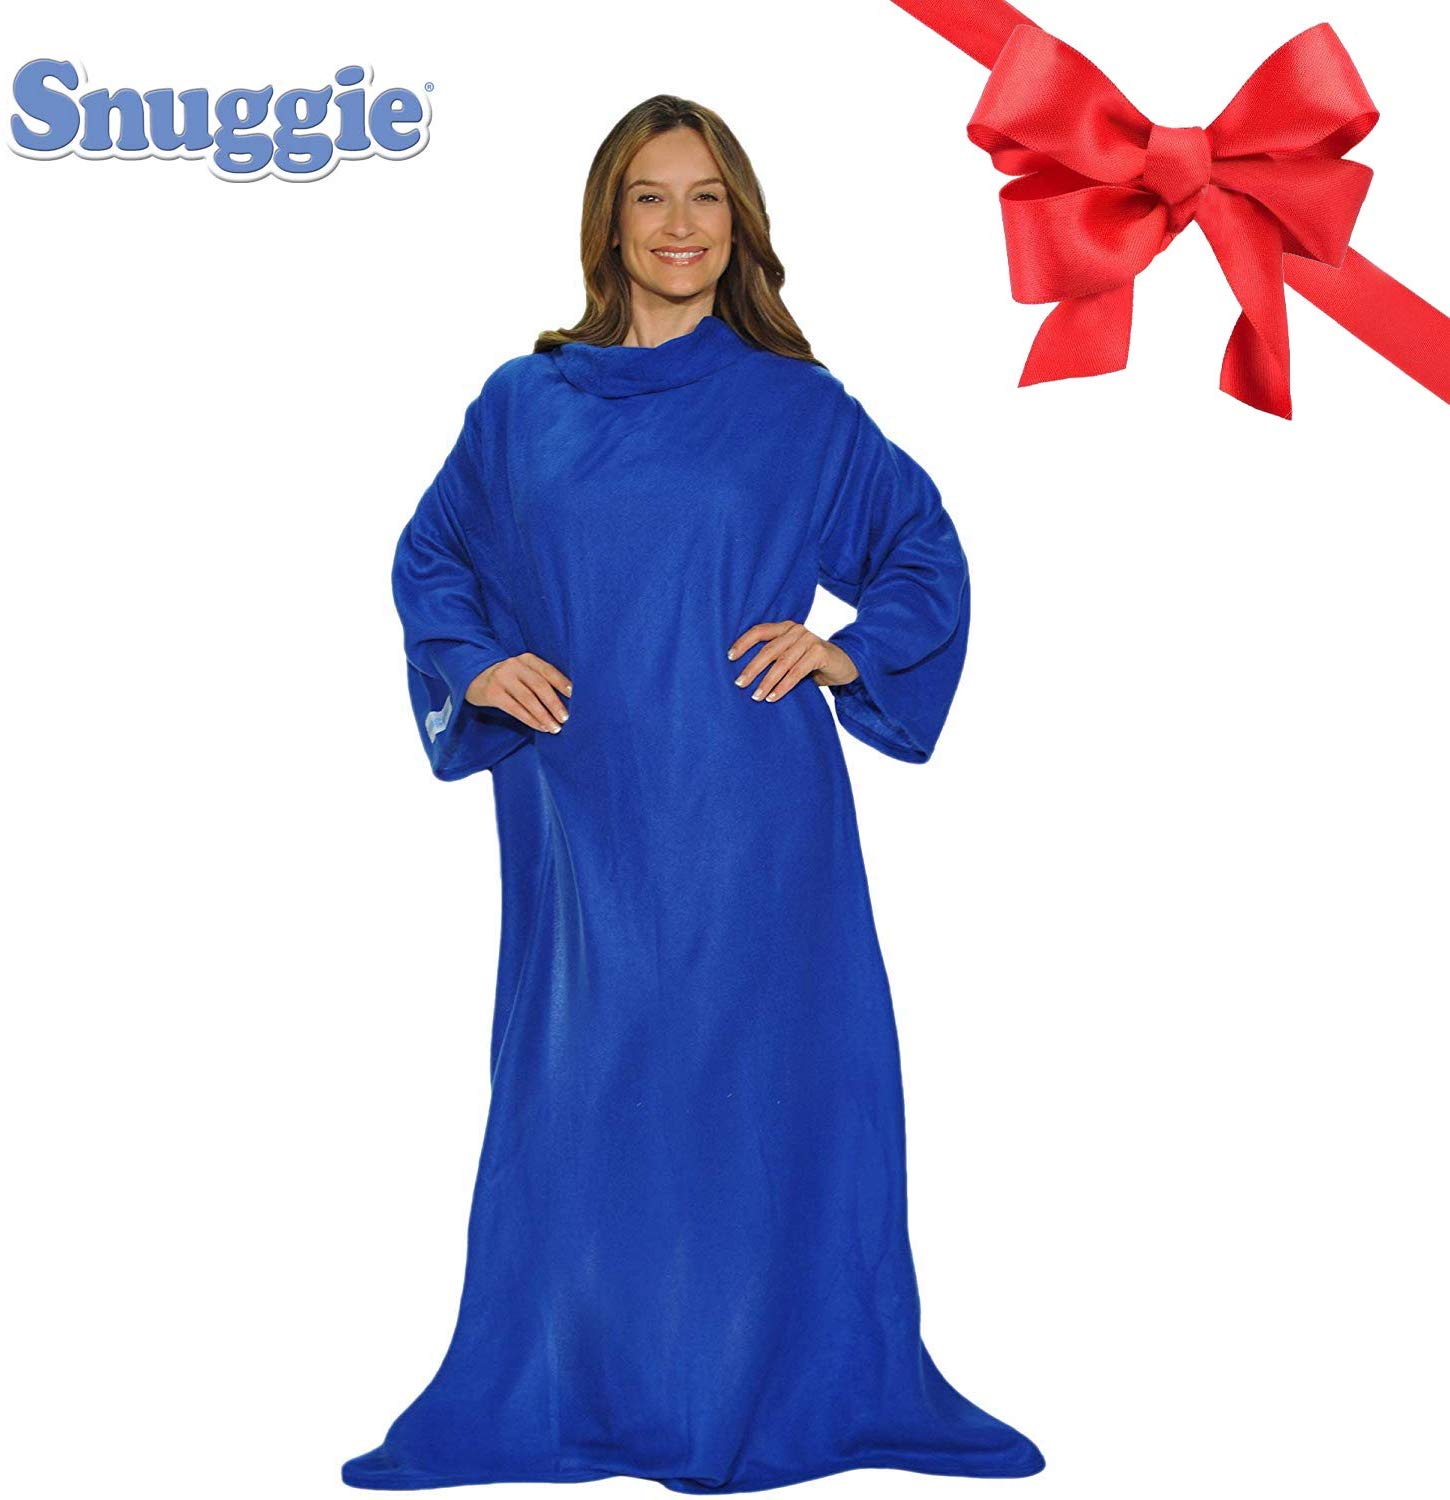 Snuggie blue wearable blanket brings comfort to people with chronic illness.